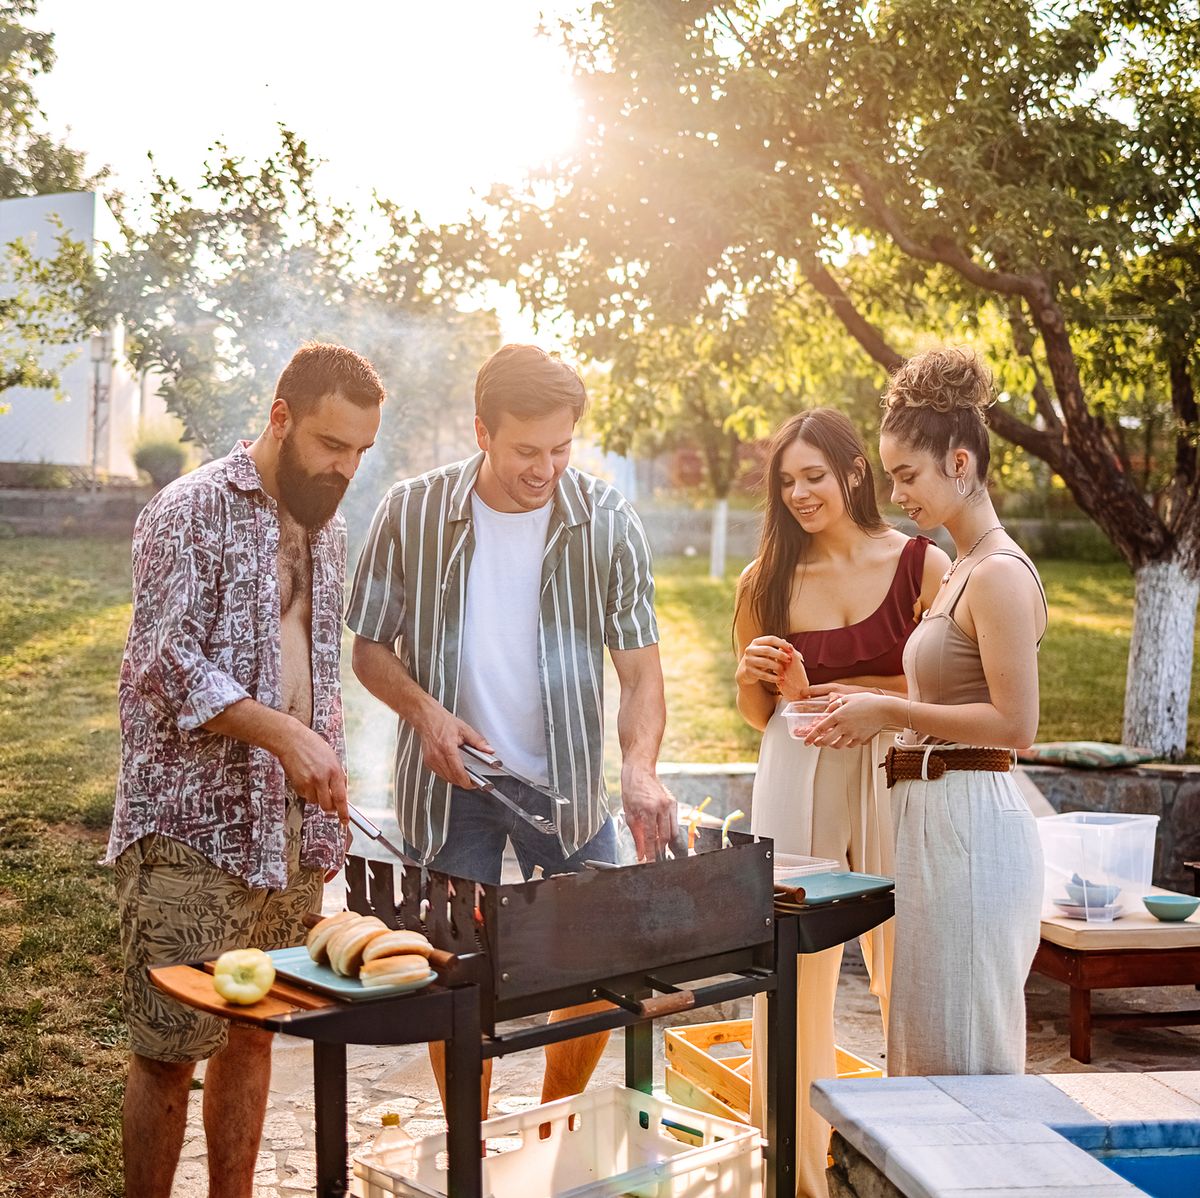 10 Genius Grilling Gadgets That Will Make Your Next Barbecue the Best One  Yet